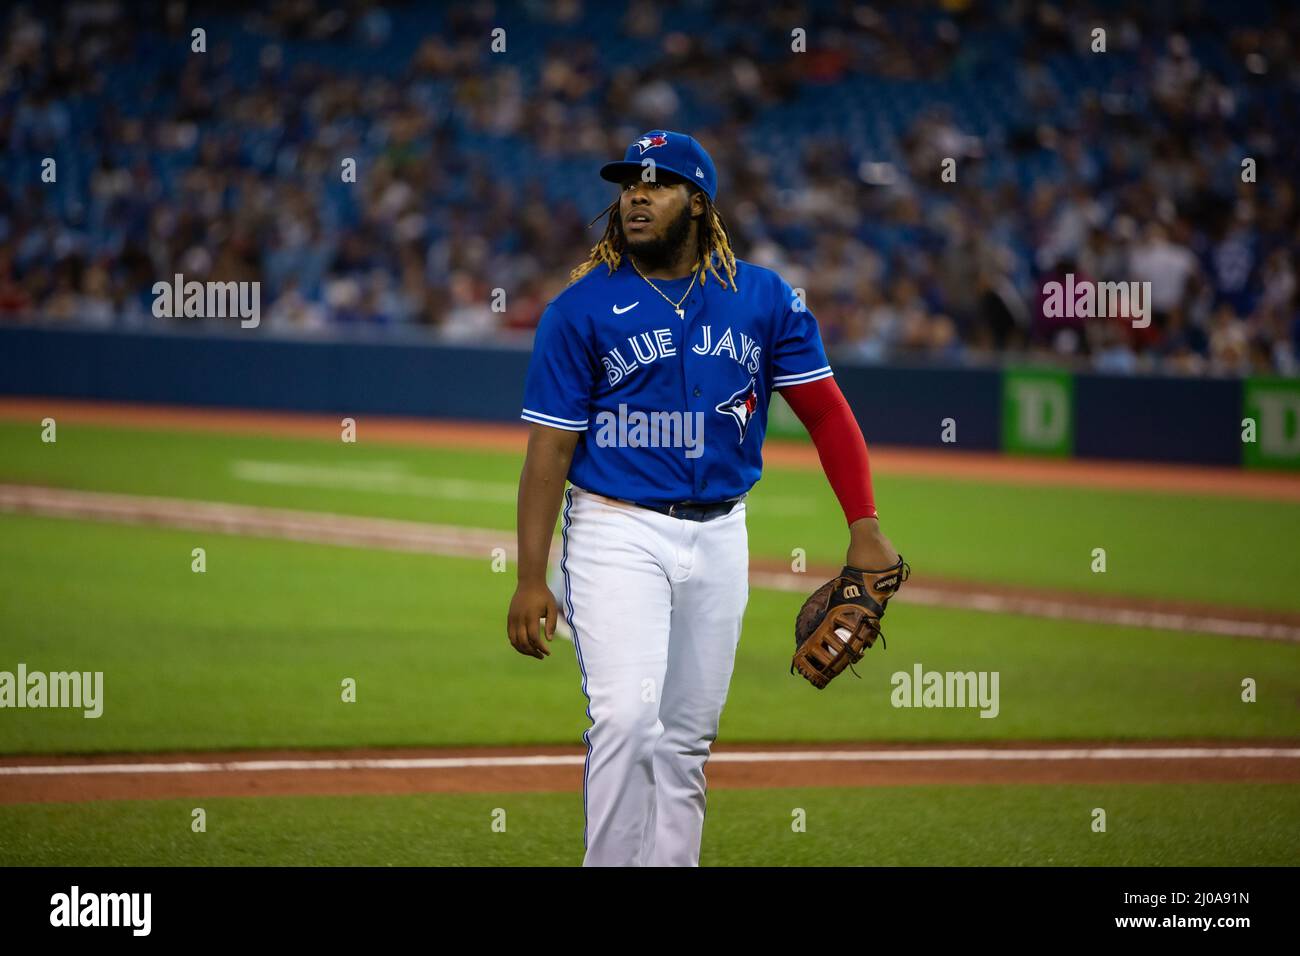 Toronto Blue Jays first baseman Vladimir Guerrero Jr. returns to the dugout after a defensive inning at Rogers Centre Stock Photo